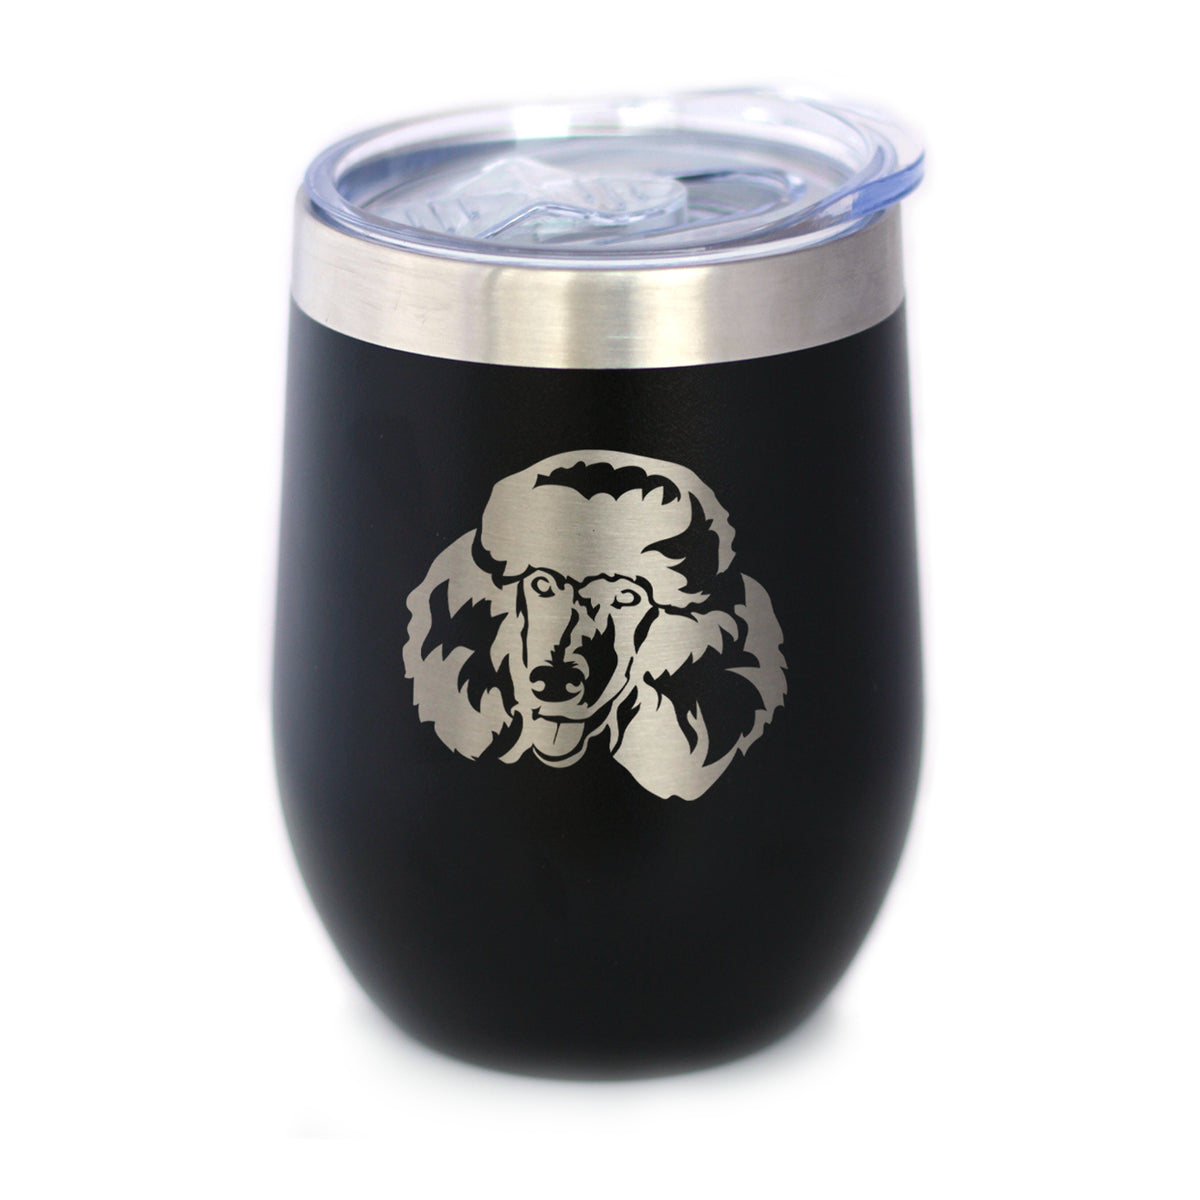 Poodle Happy Face - Wine Tumbler Glass with Sliding Lid - Stainless Steel Insulated Mug - Poodle Dog Gift for Women and Men